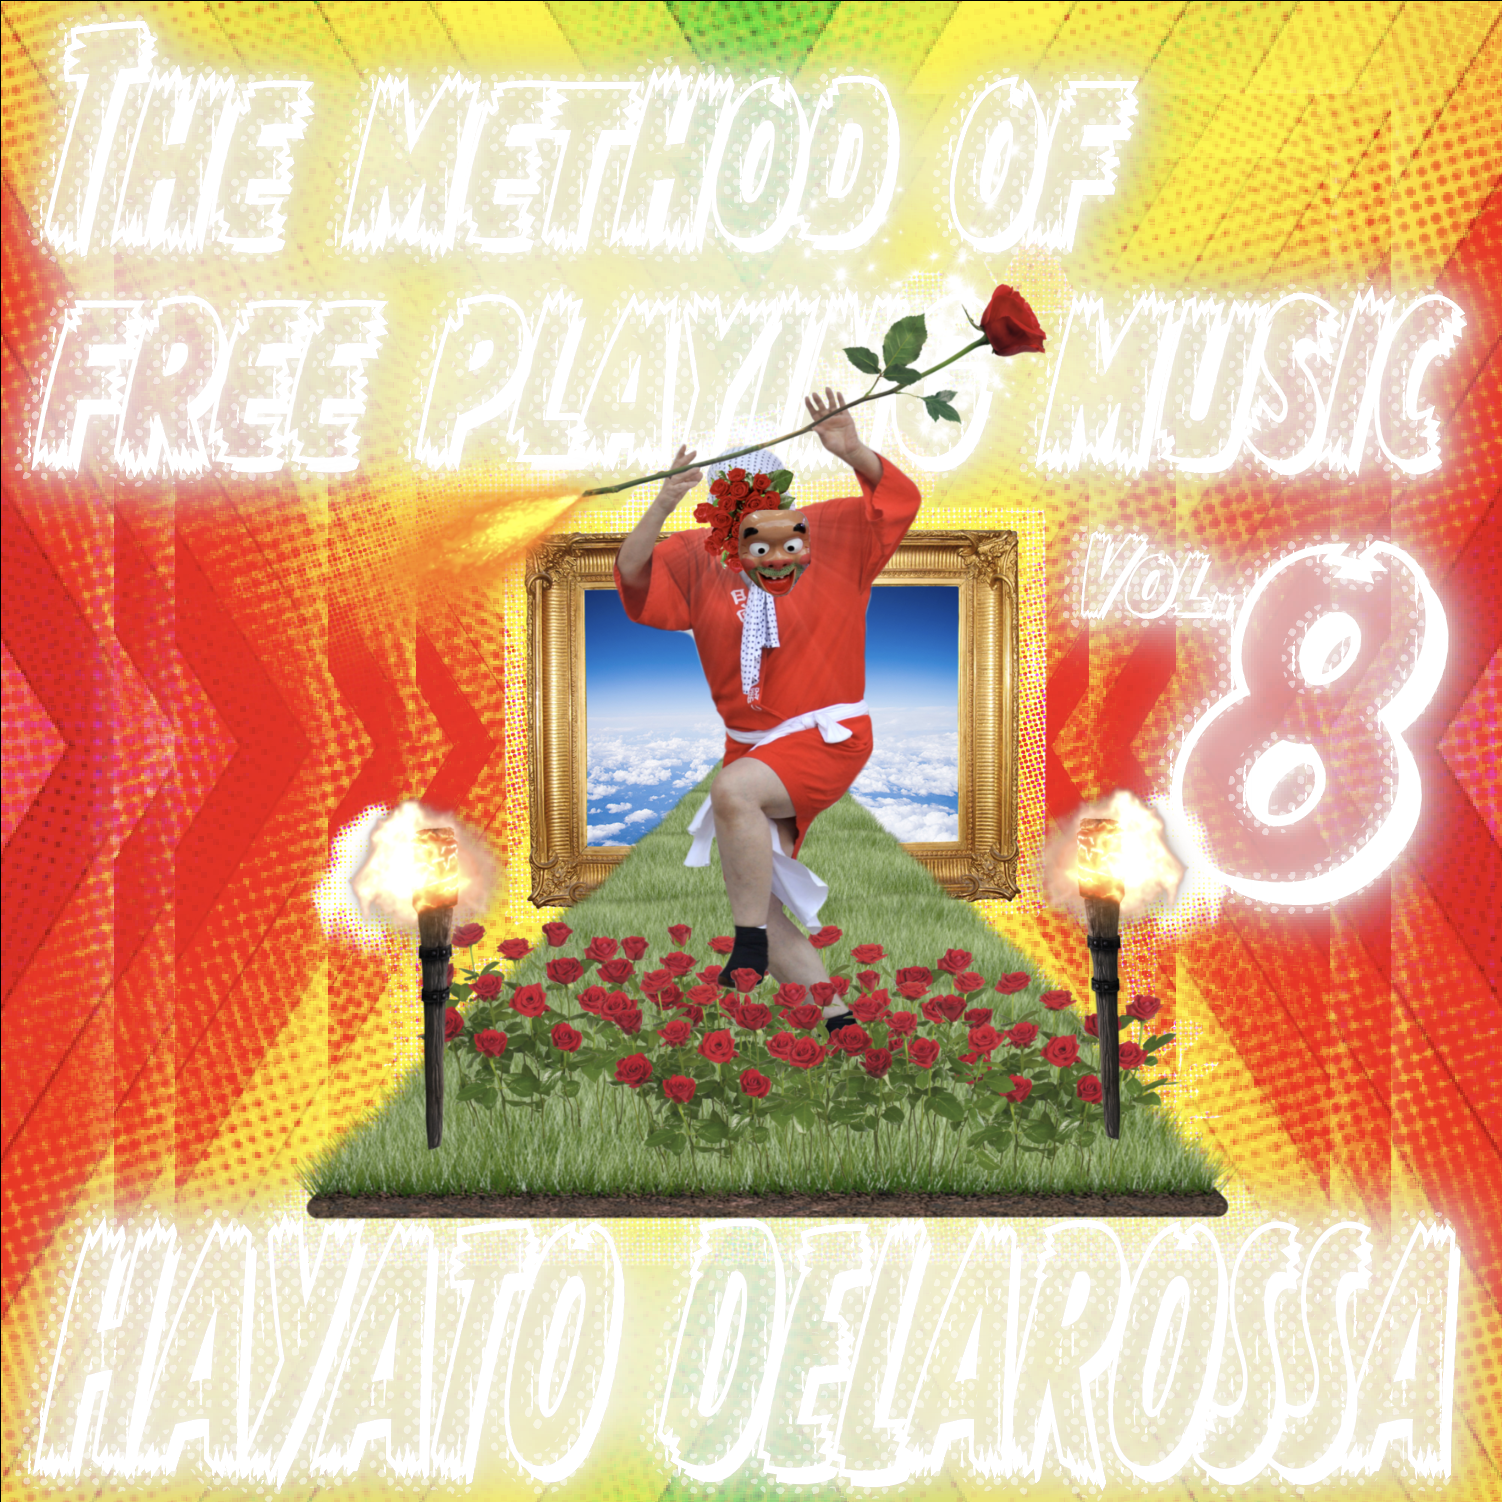 NEW MIX UPLOAD “the method of free playing music vol.8”